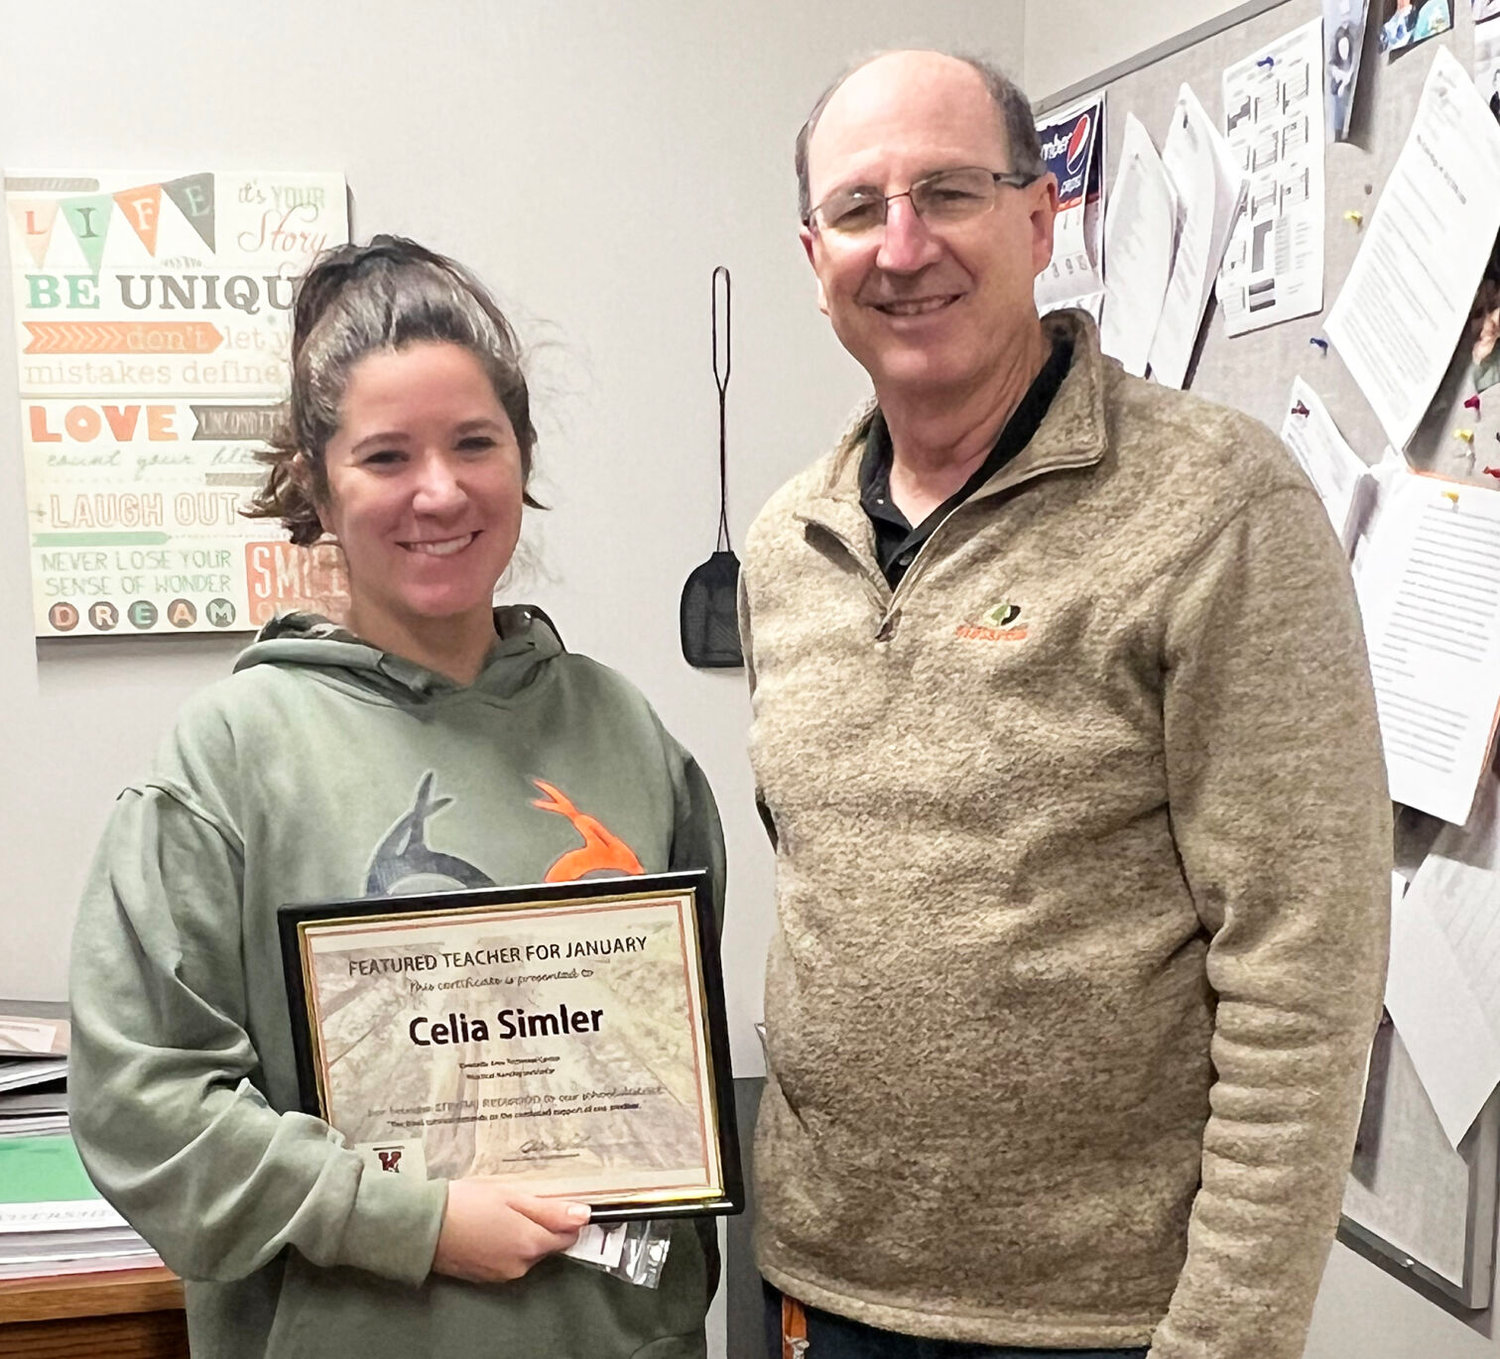 Celia Simler has worked at the Kirksville Area Technical Center for six years in Adult Practical Nursing. "Teaching is a passion and watching light bulbs go on is the best feeling in the world," she said. 